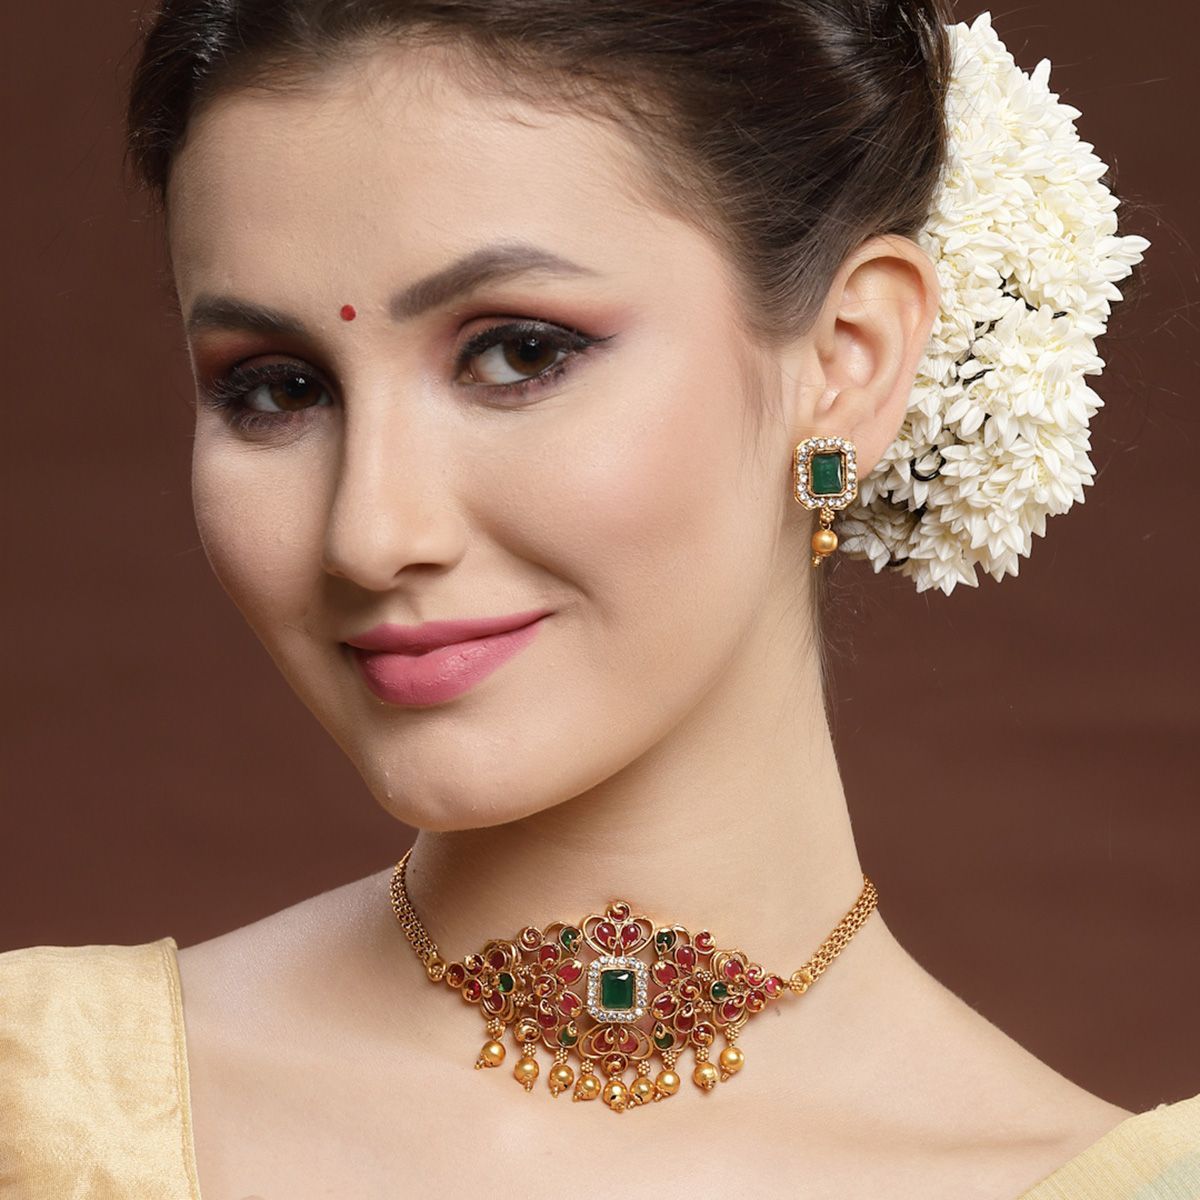 Indian Bollywood Style Gold Plated Choker Necklace CZ Ruby Red Pearl  Jewelry Set | eBay